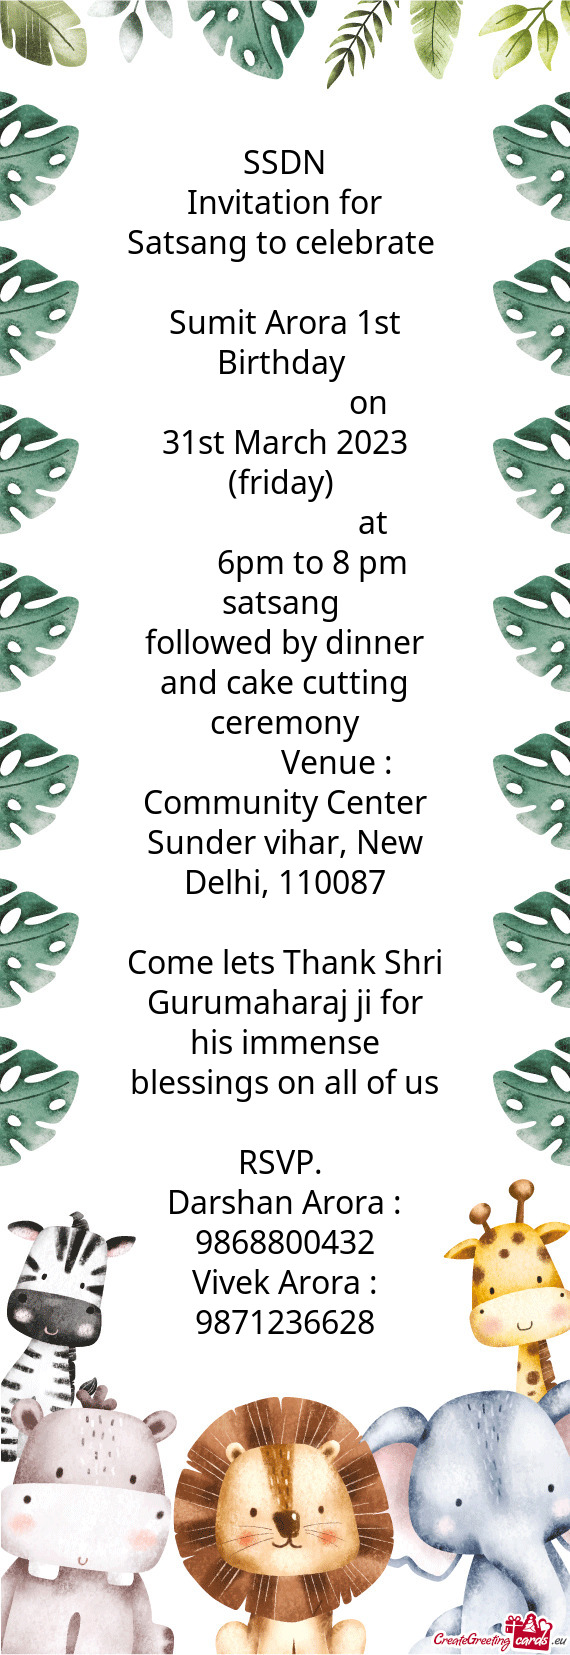 Invitation for Satsang to celebrate